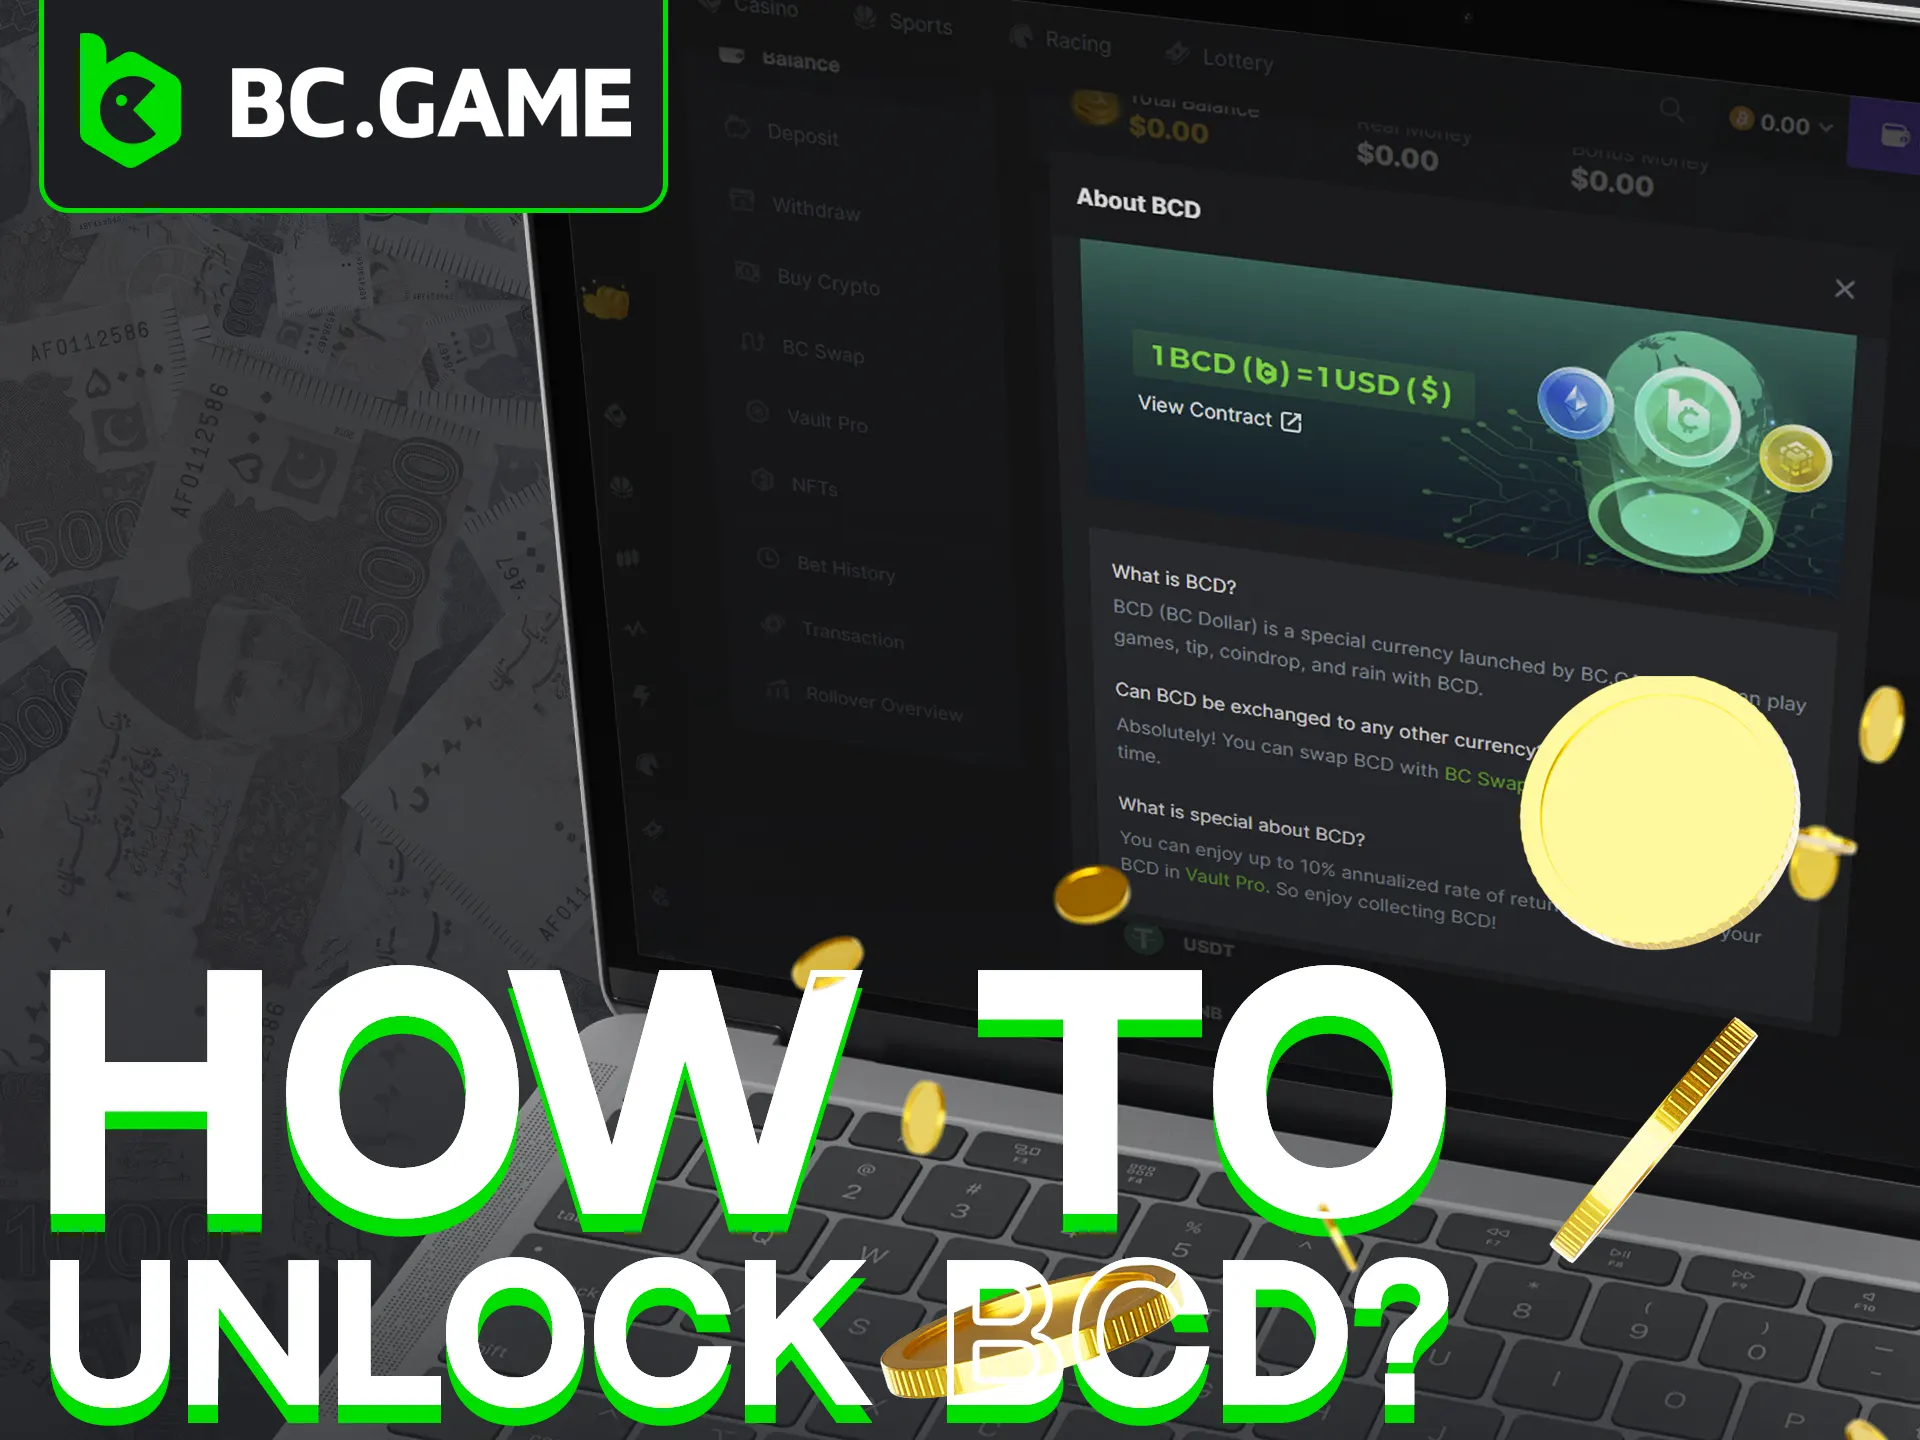 Find out how to unlock BCD at BC Game.